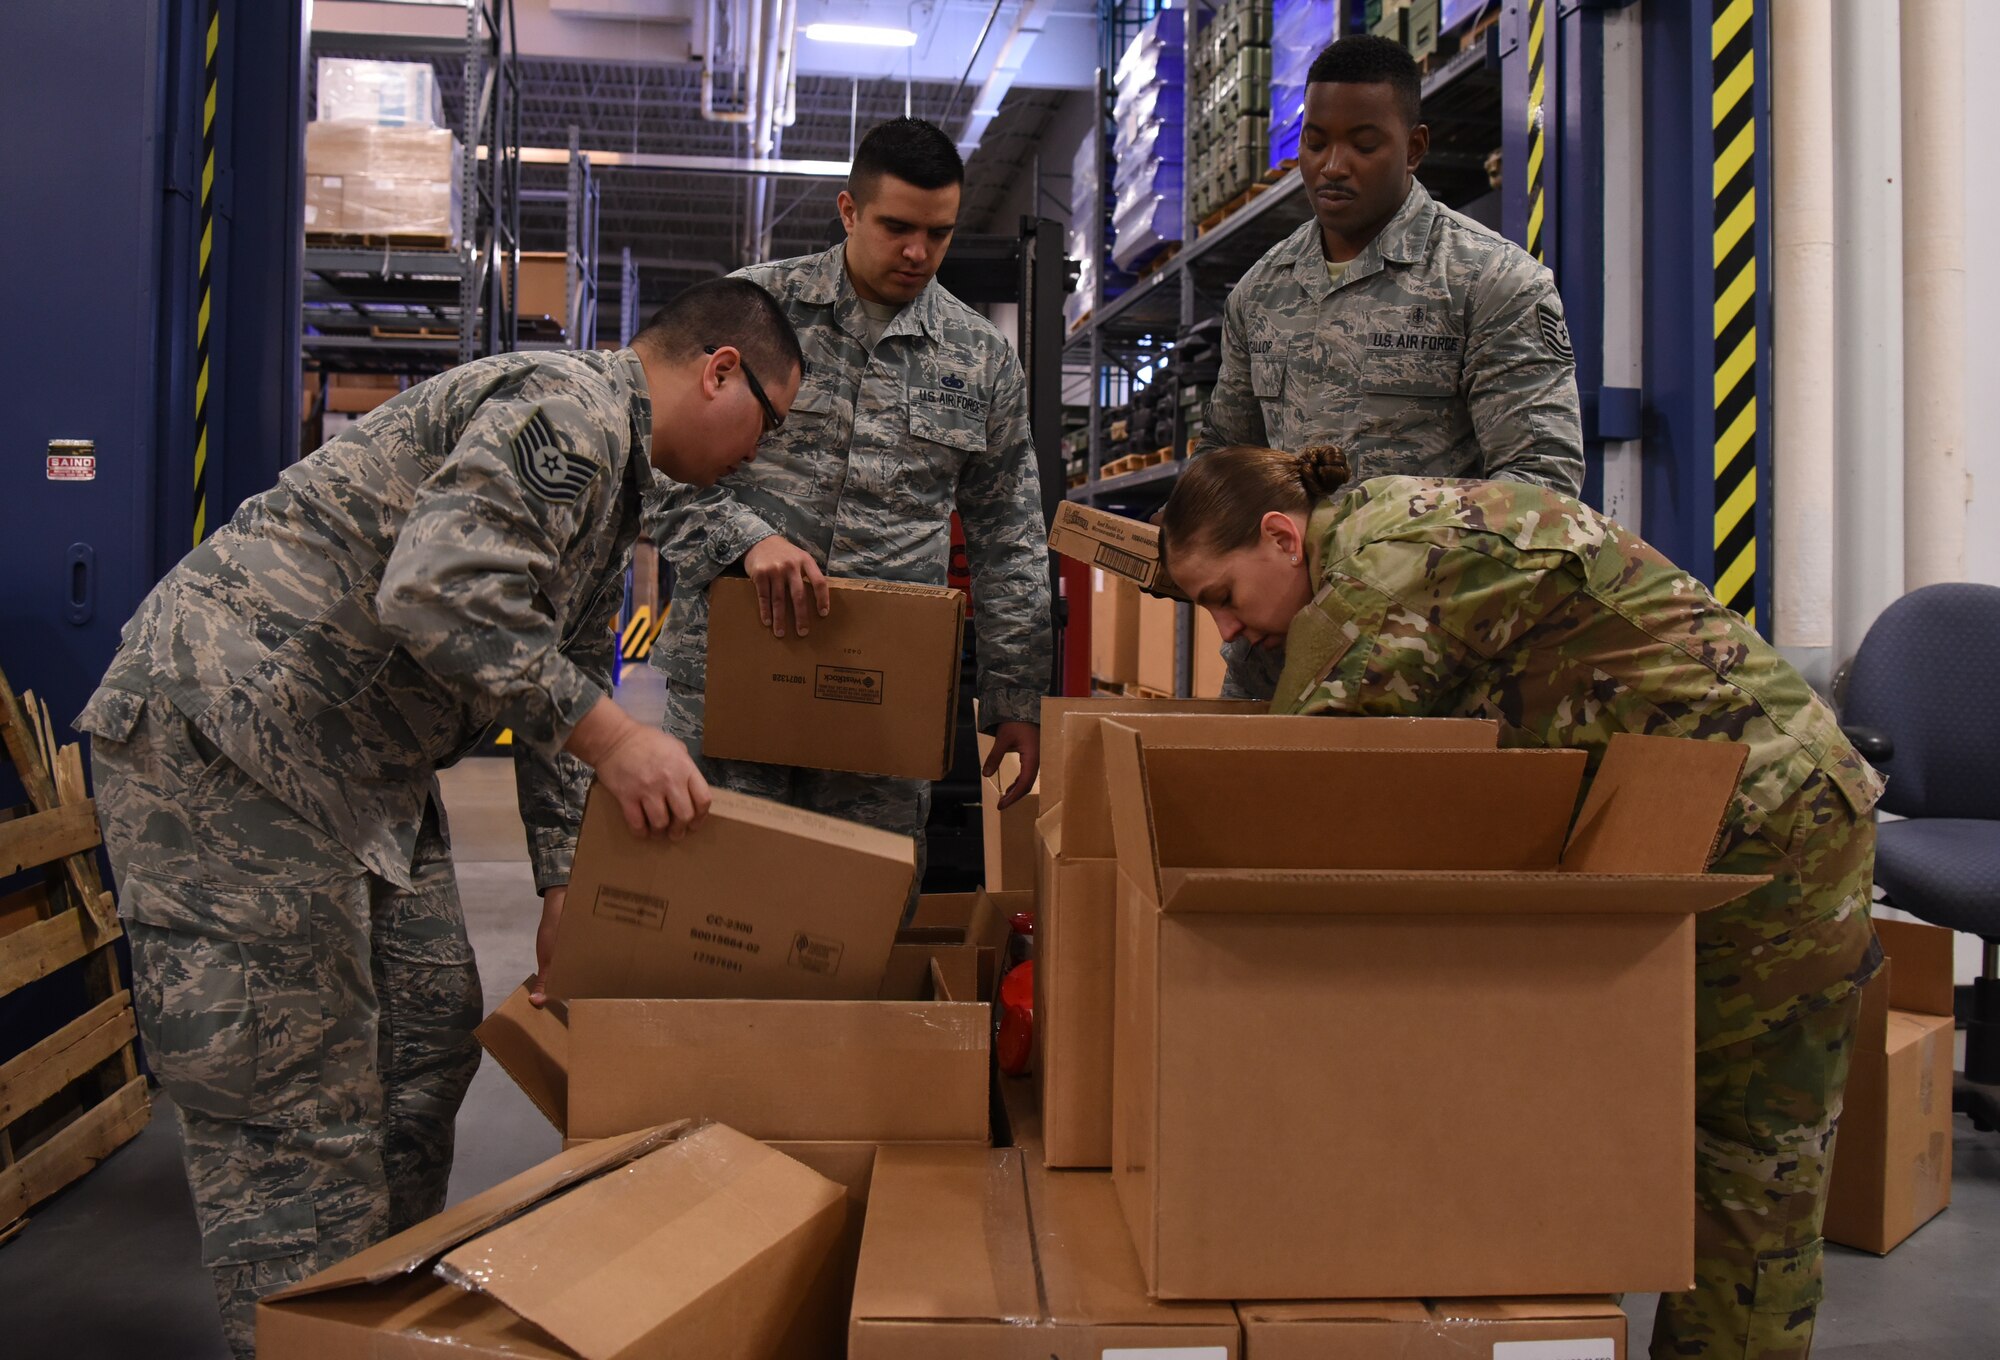 Airmen organize donations provided by the Denver USO Jan. 28, 2019, at F. E. Warren Air Force Base, Wyo. The care packages are part of the USO2GO initiative, where snacks are transported to missile alert facility sites to boost morale for Airmen in the field. (U.S. Air Force photo by Tech. Sgt. Ashley Manz)